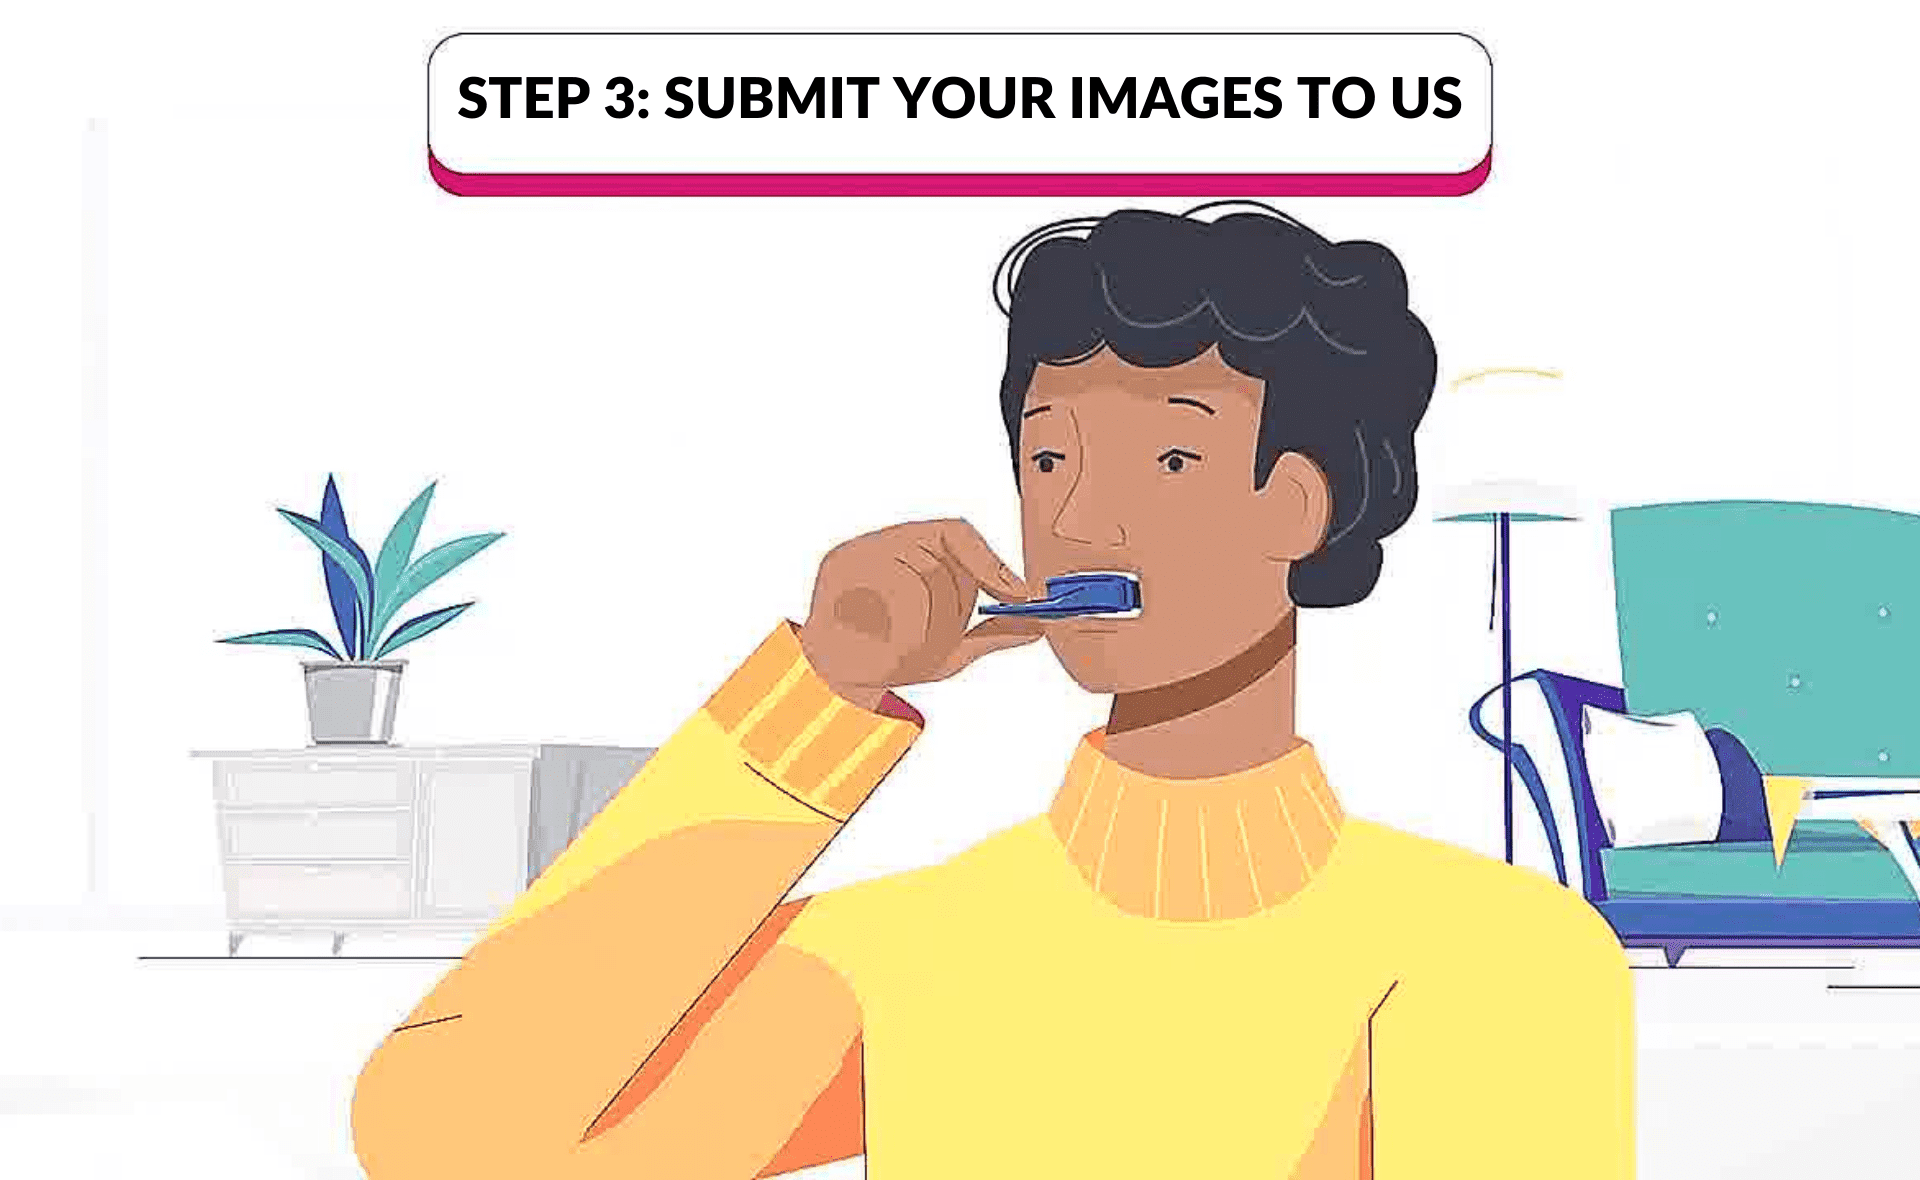 Step 3: Submit Your Images to Us